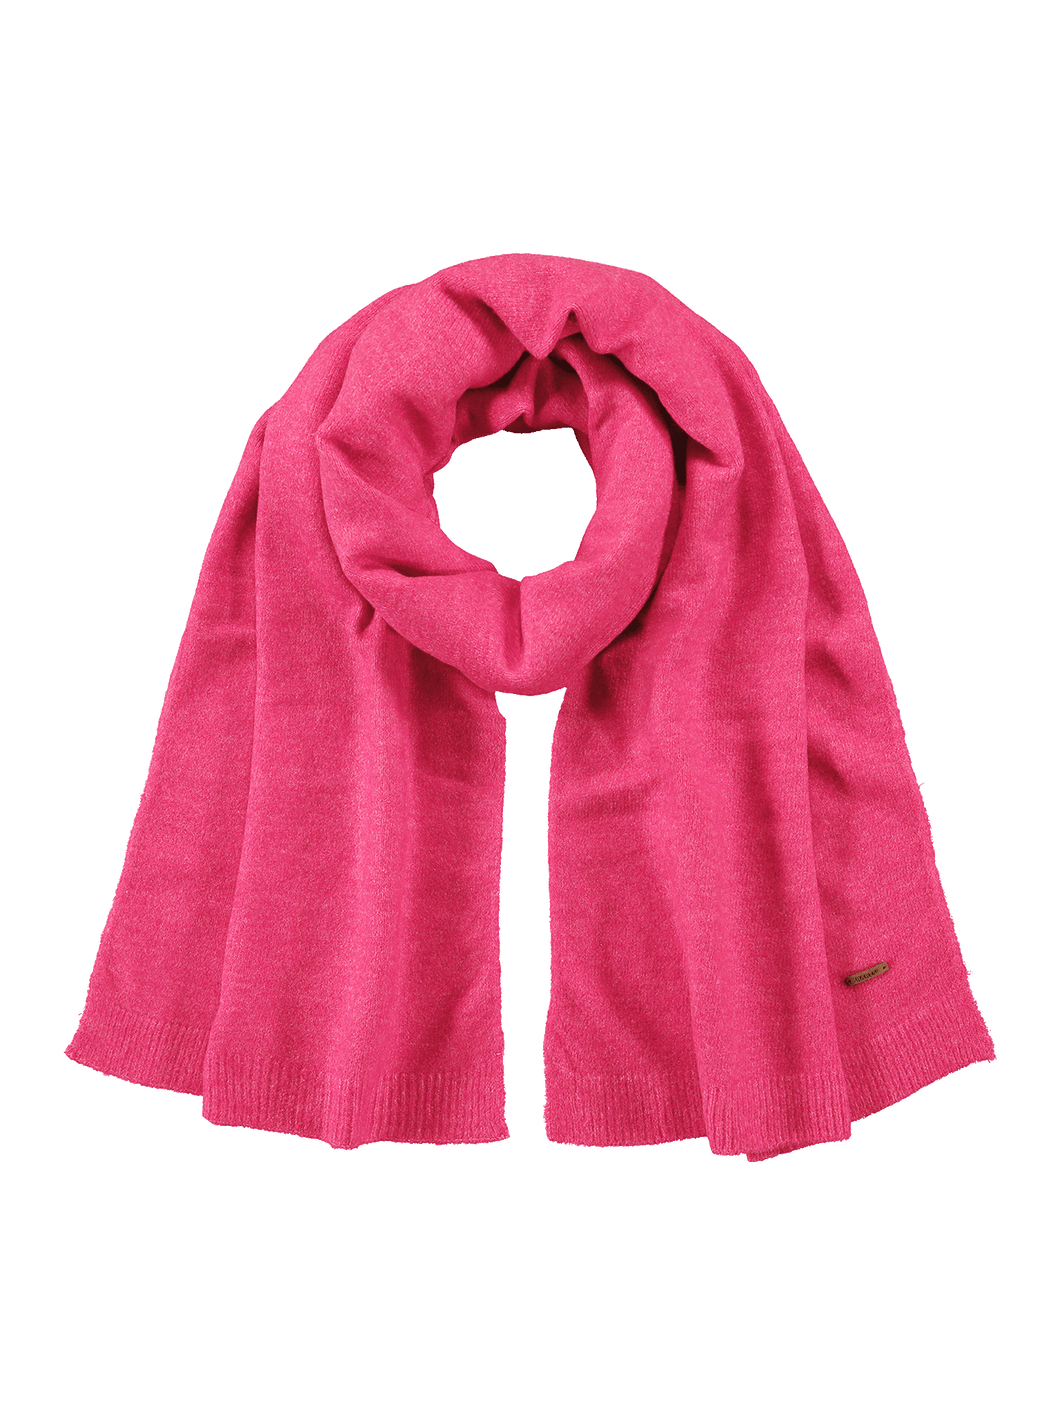 Witzia Scarf - Hot Pink | One size